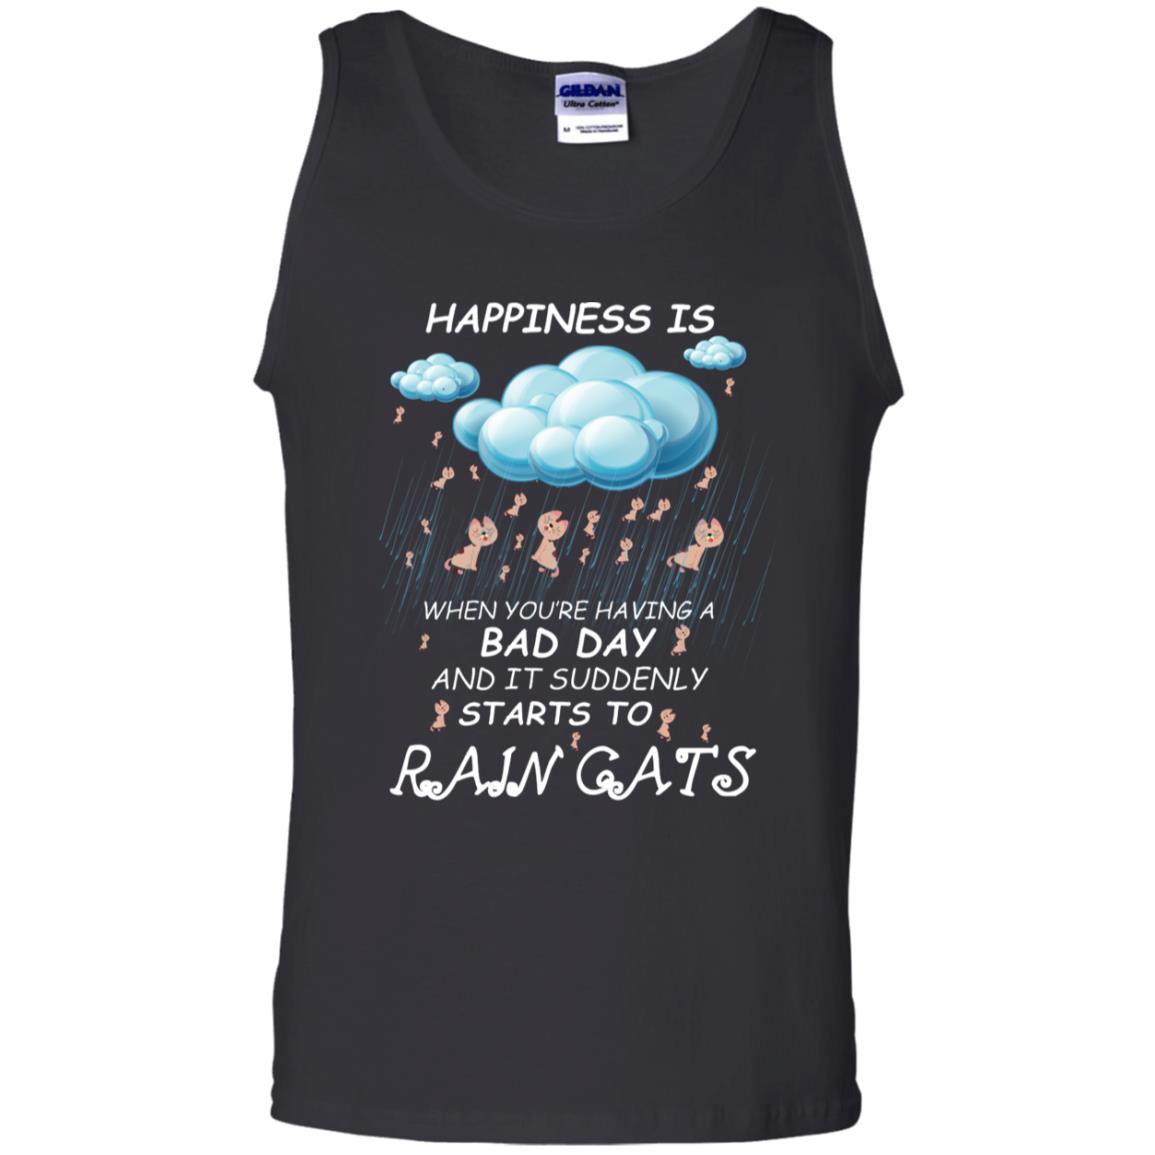 When You're Having A Bad Day And It Suddenly Starts To Rain CatsG220 Gildan 100% Cotton Tank Top